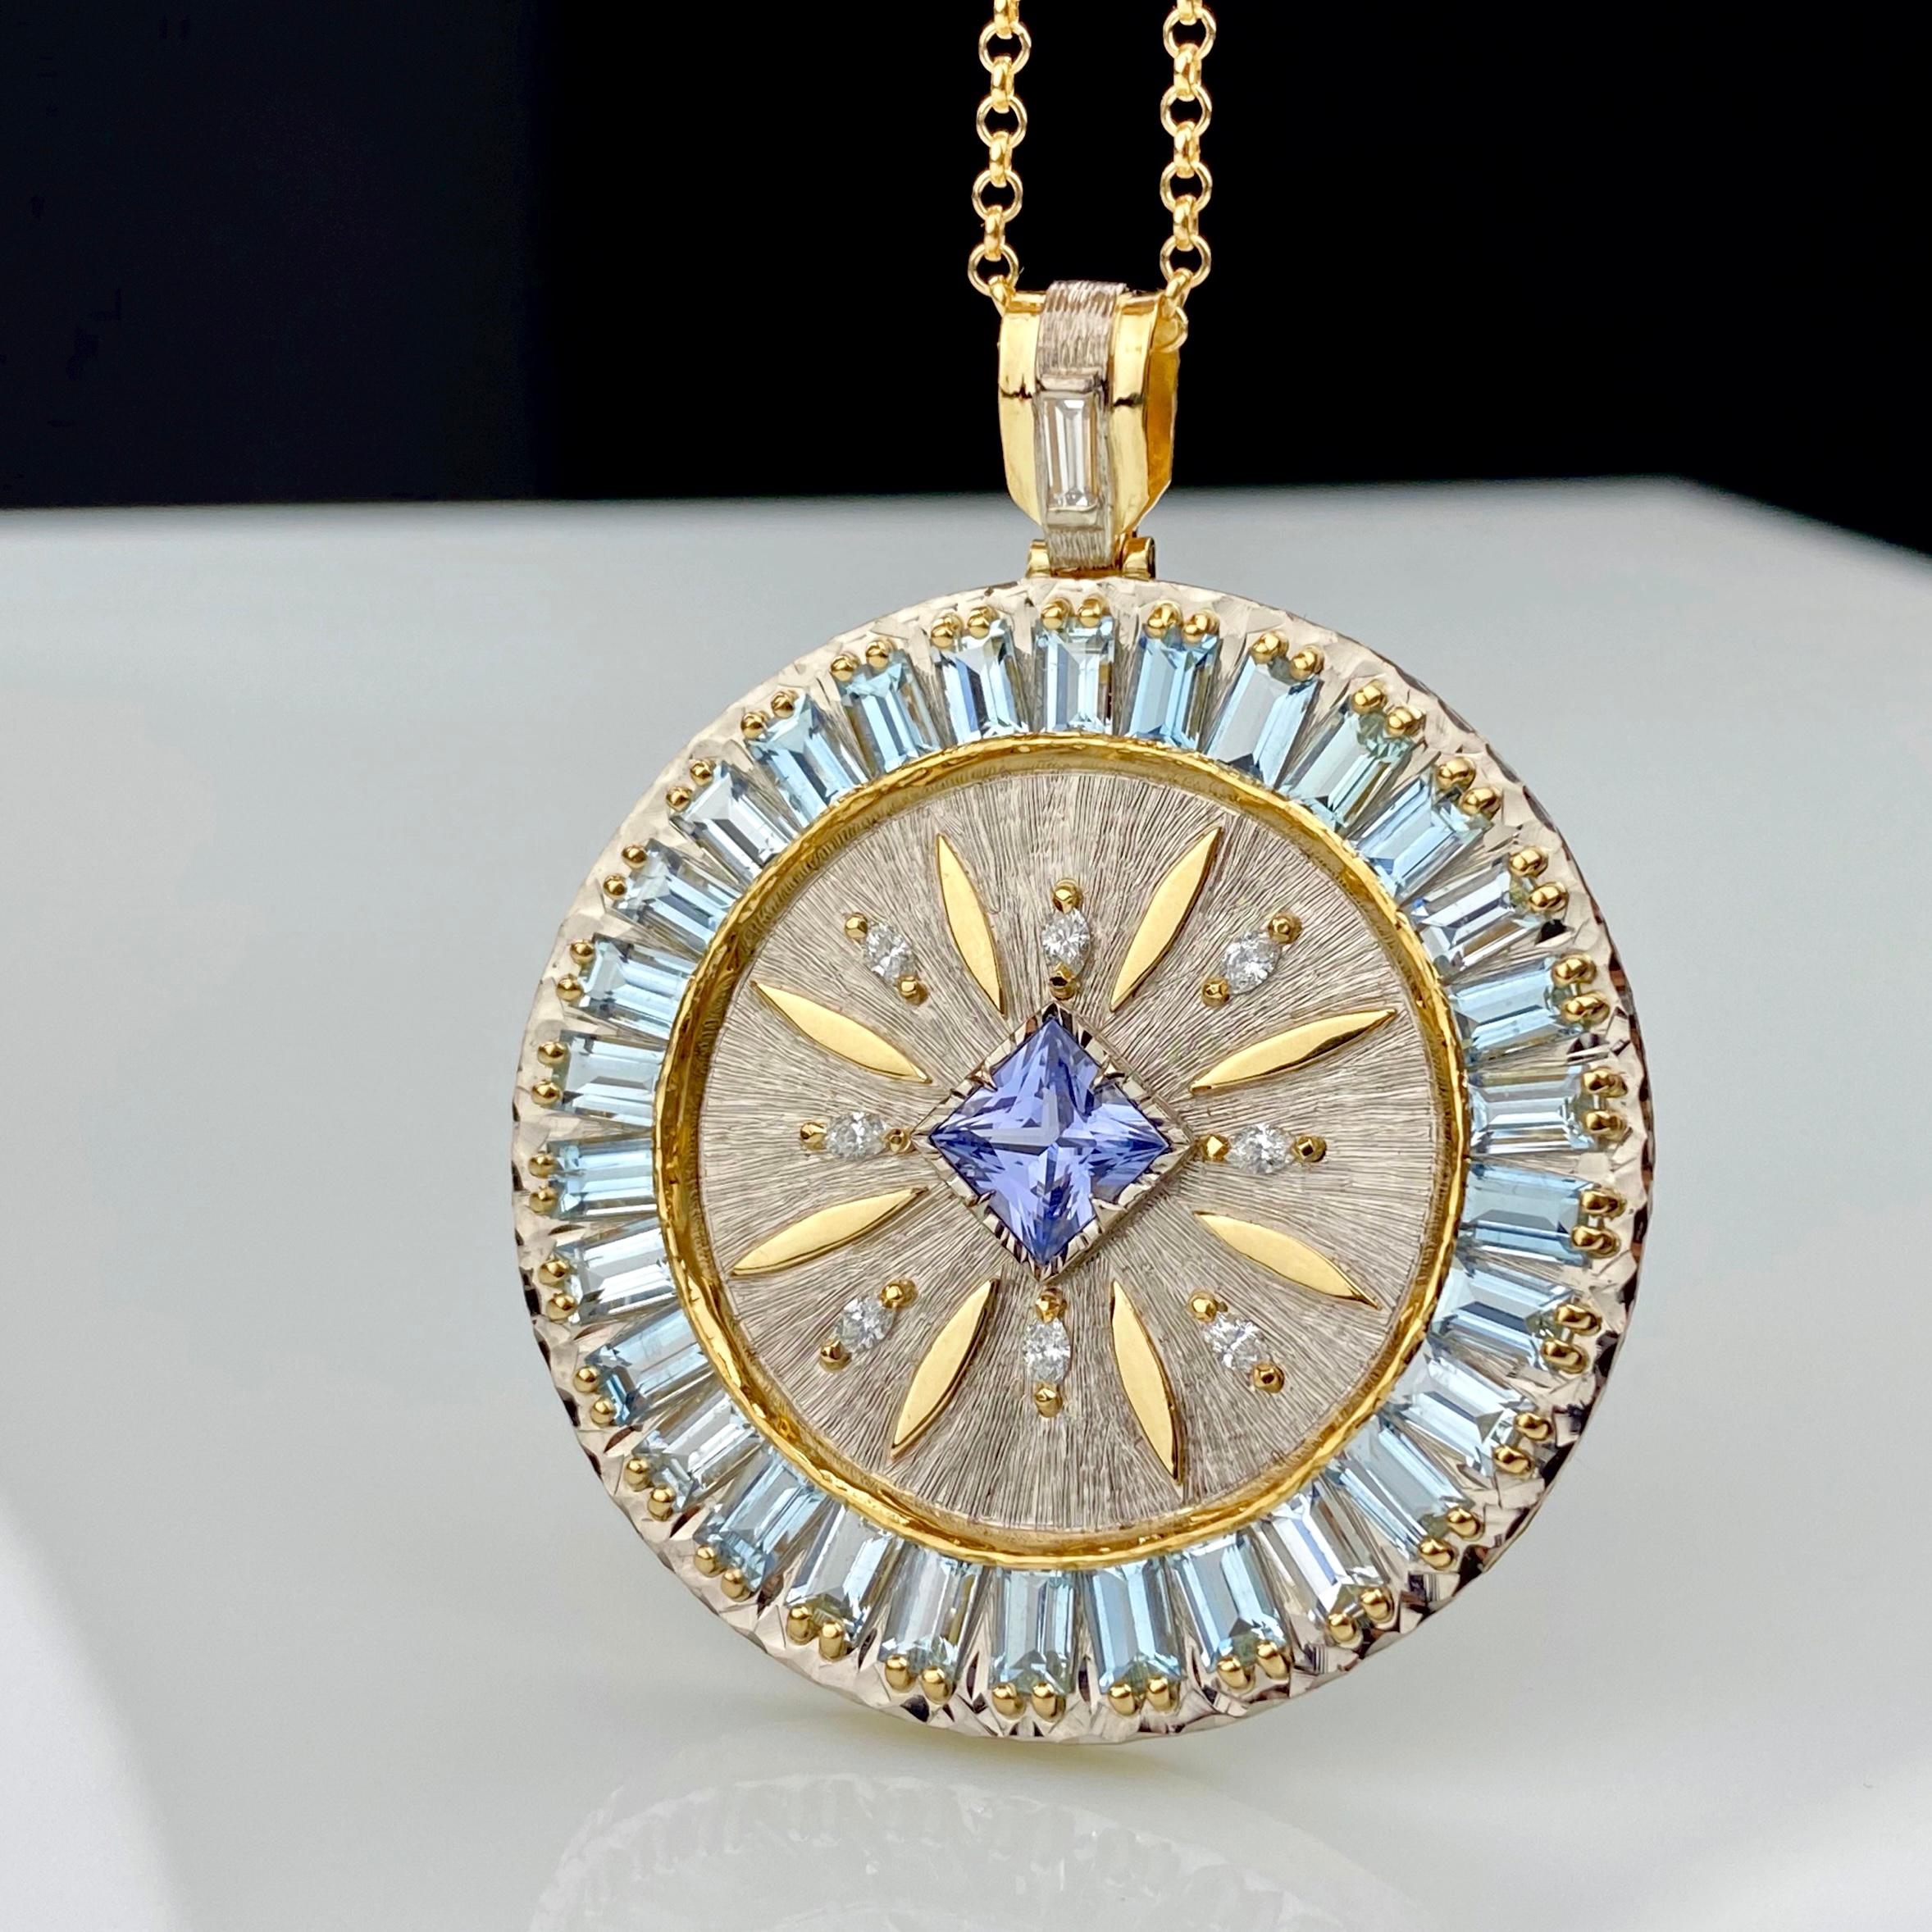 This 5,5ct Ceylon Sapphire is surround by 30 Aquamarine and 16 Diamonds and one central diamond on the pendant with total weight 0,53ct.  Double-sided Pendant